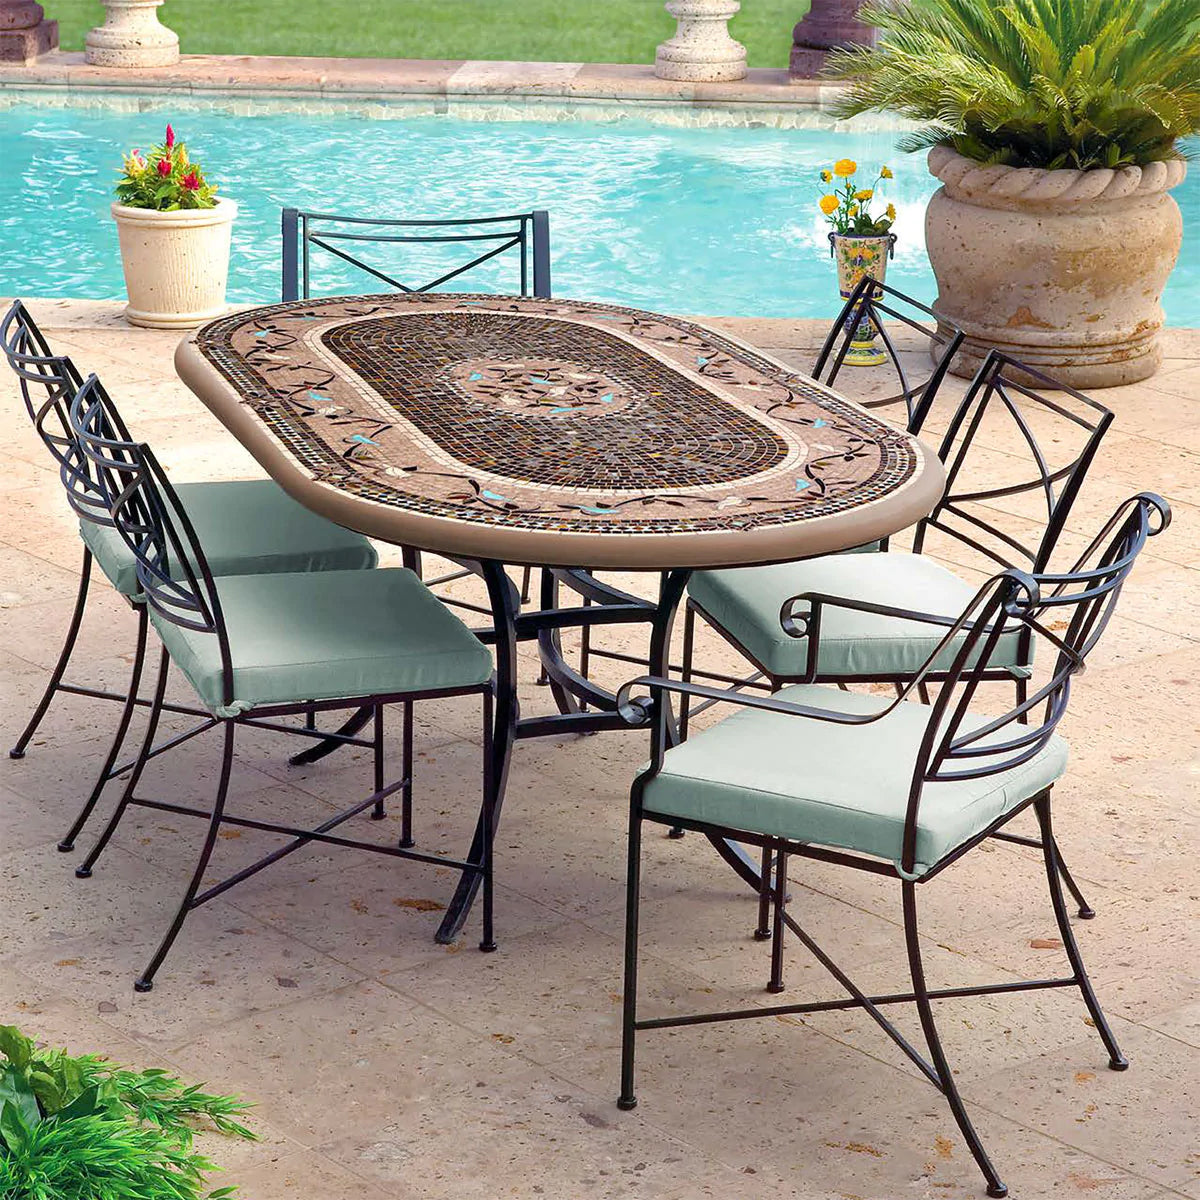 KNF Mosaic Patio Furniture